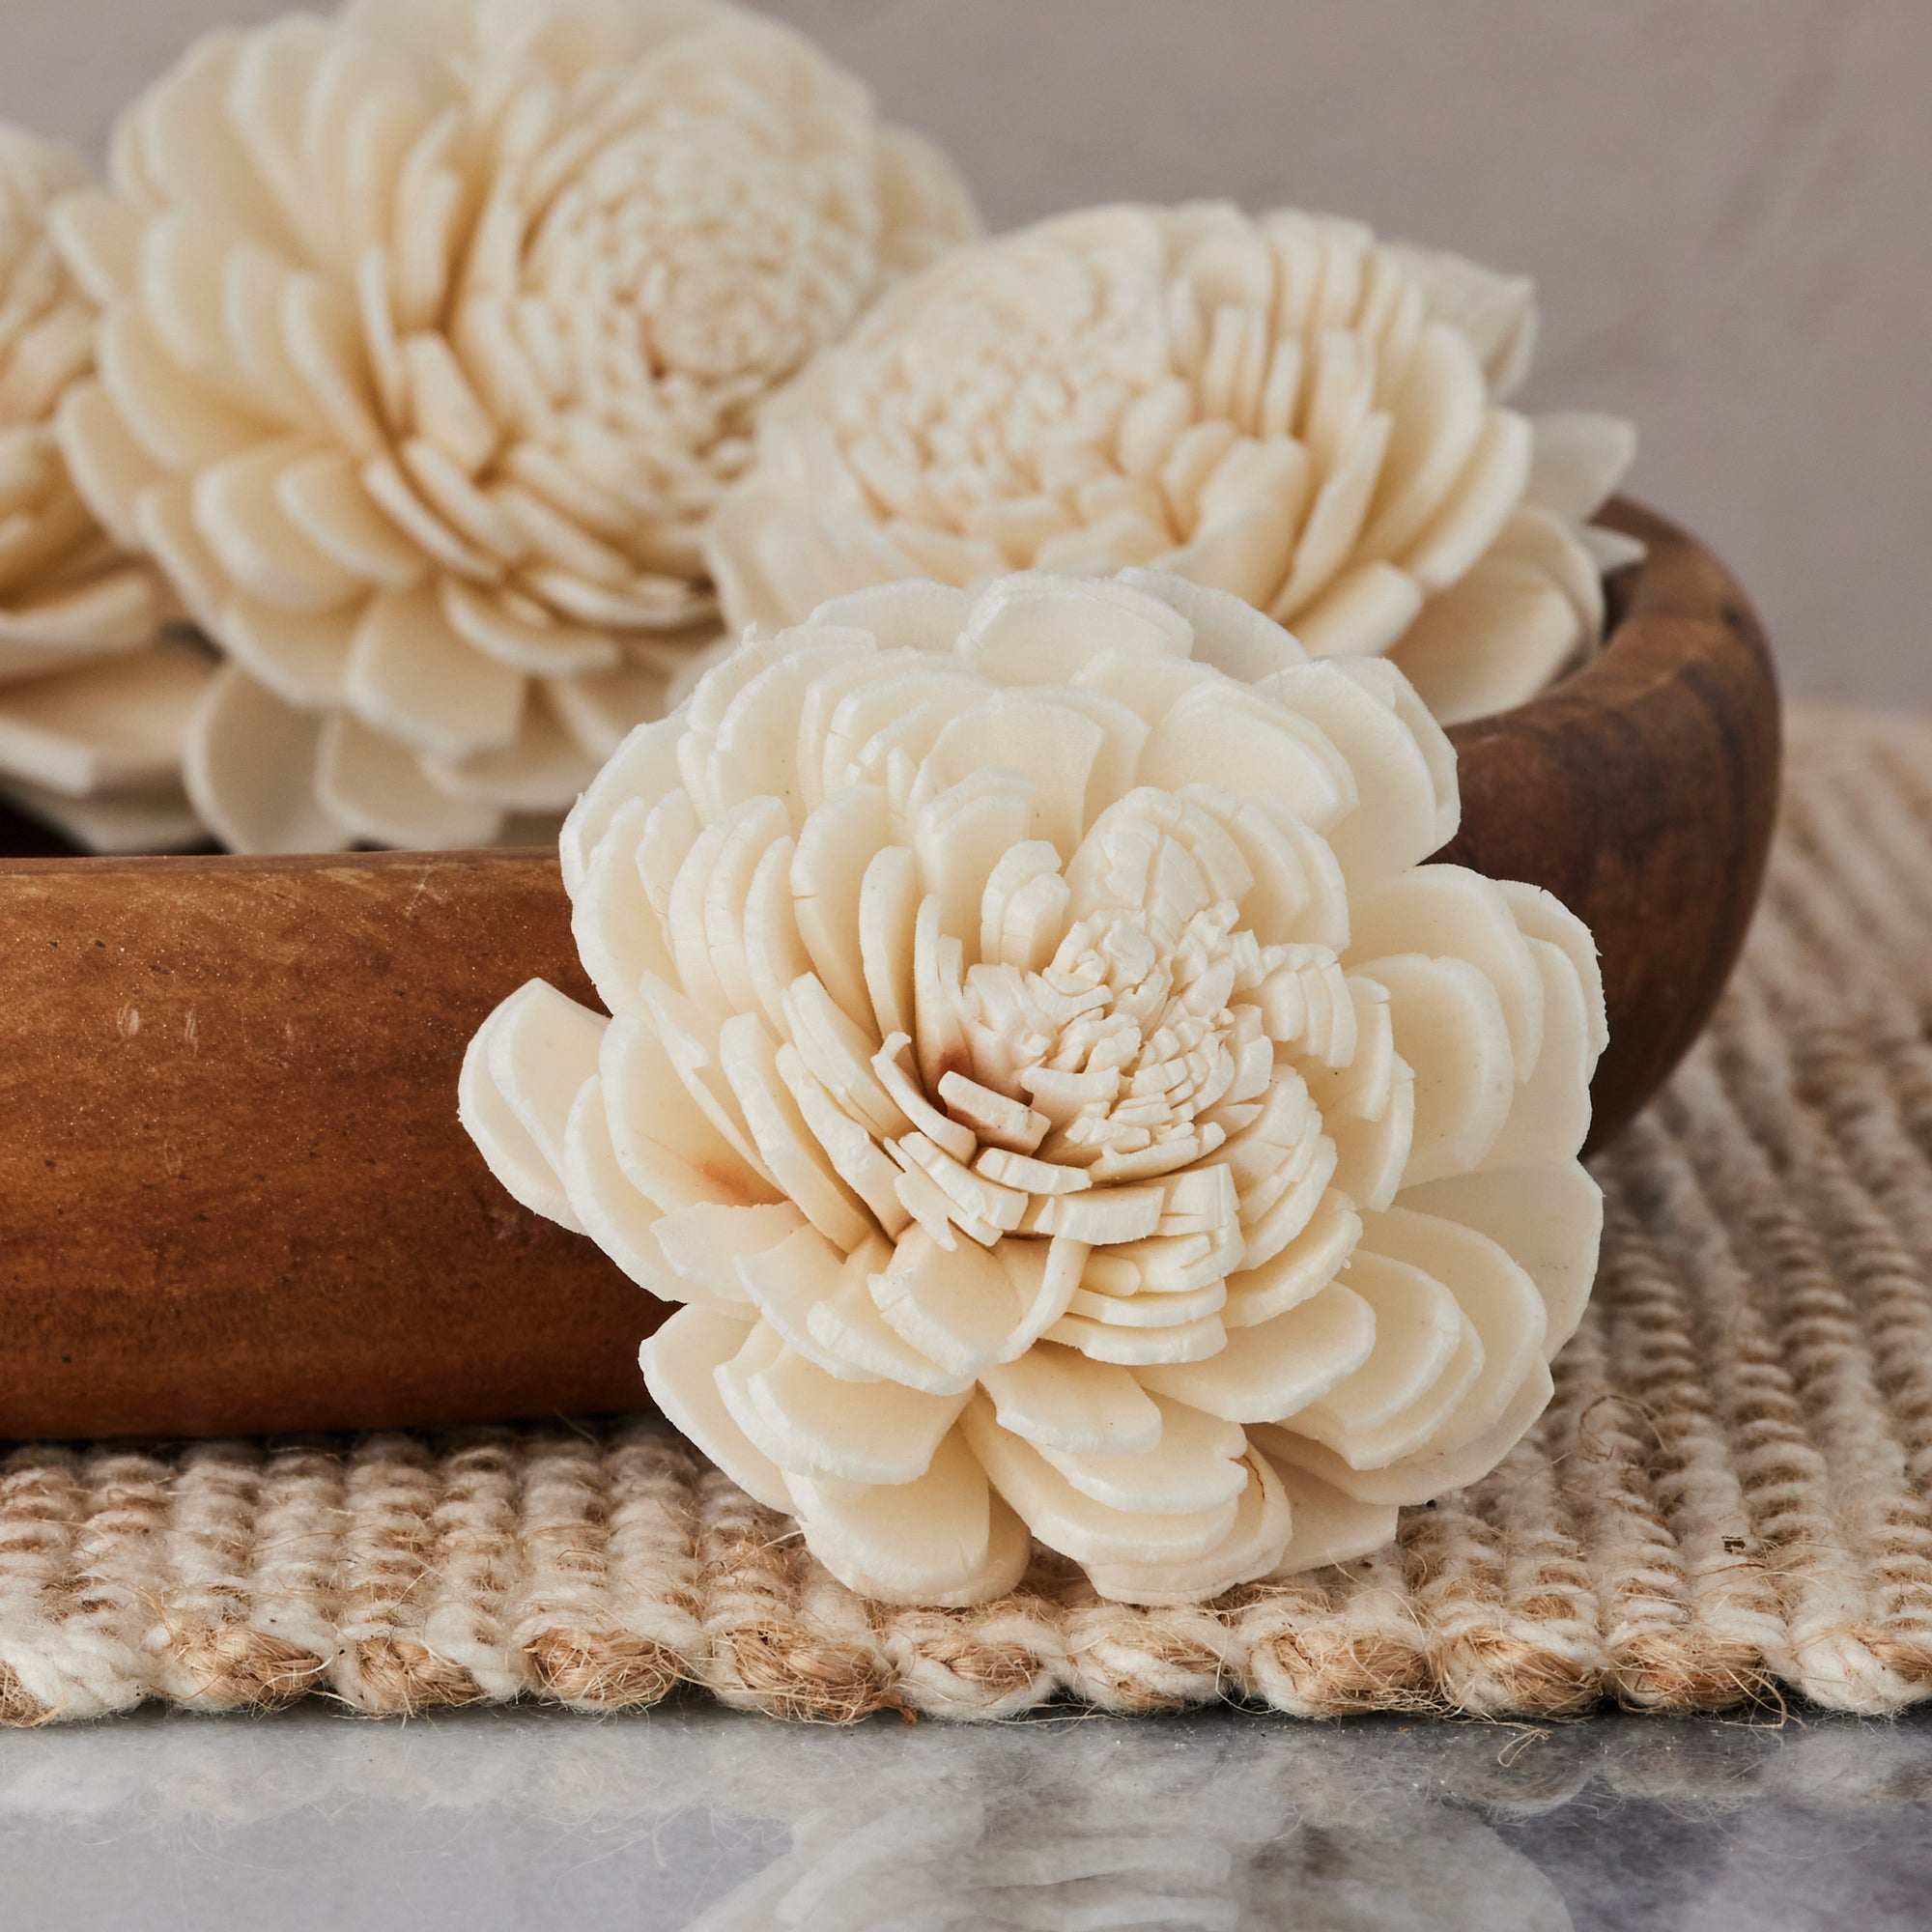 Marigold - set of 12 - 1.5 inches